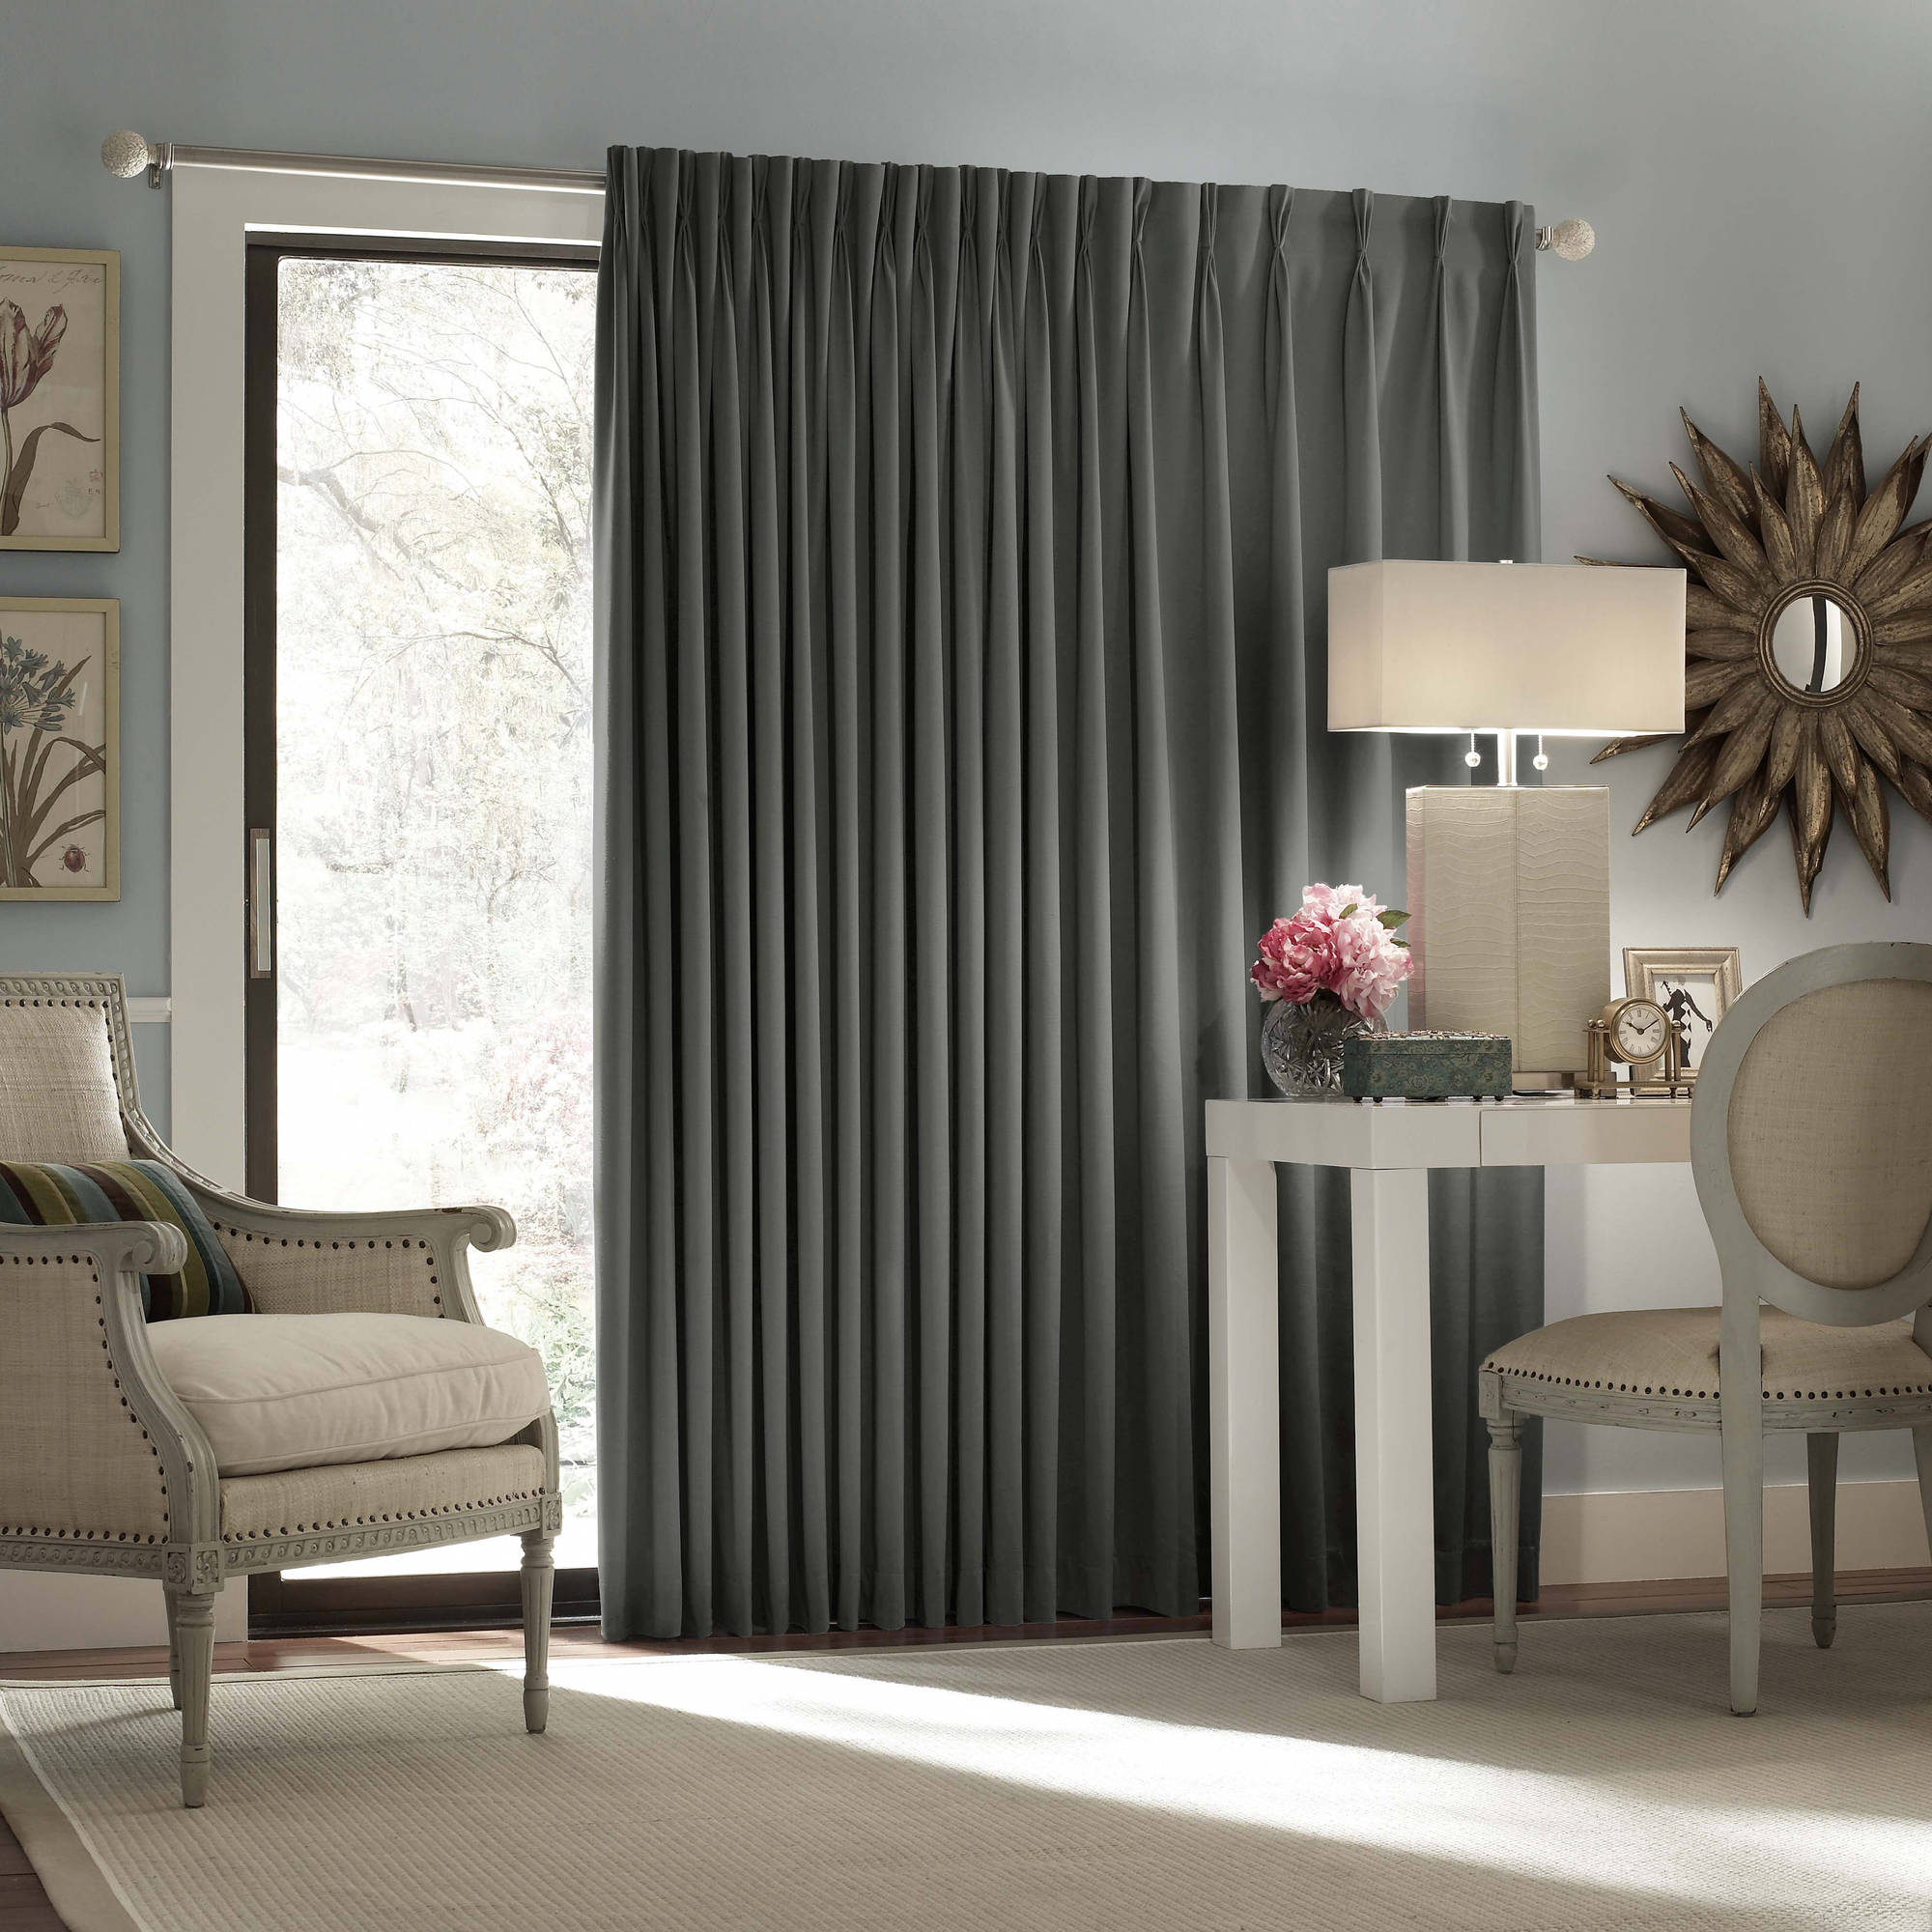 Curtains For Patio Doors Visualhunt, What Curtains For Patio Doors